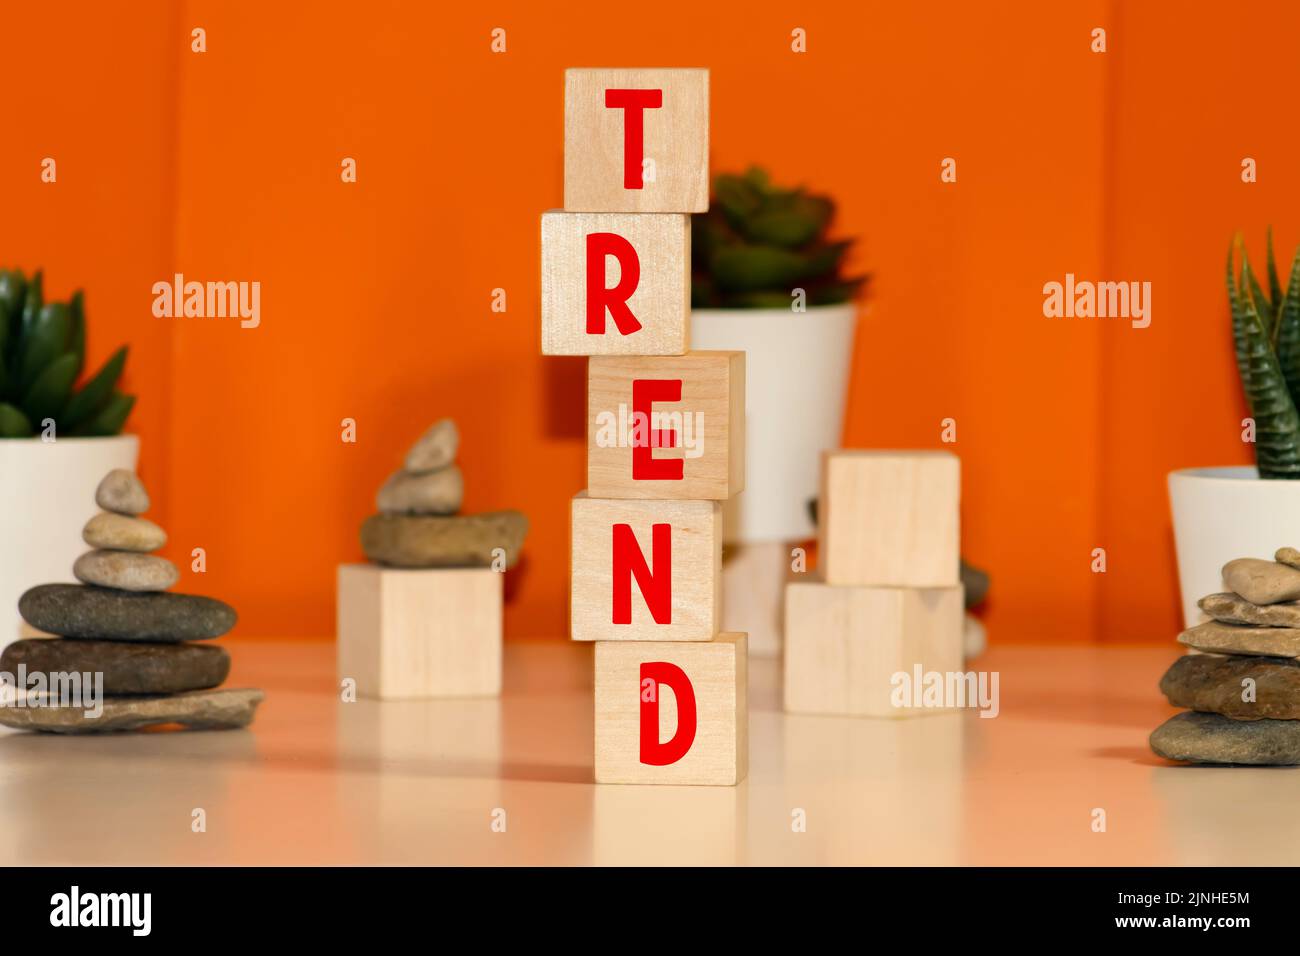 Trend symbol. Concept word Trend on wooden cubes. Beautiful orange background. Business and Trend concept. Copy space. Stock Photo